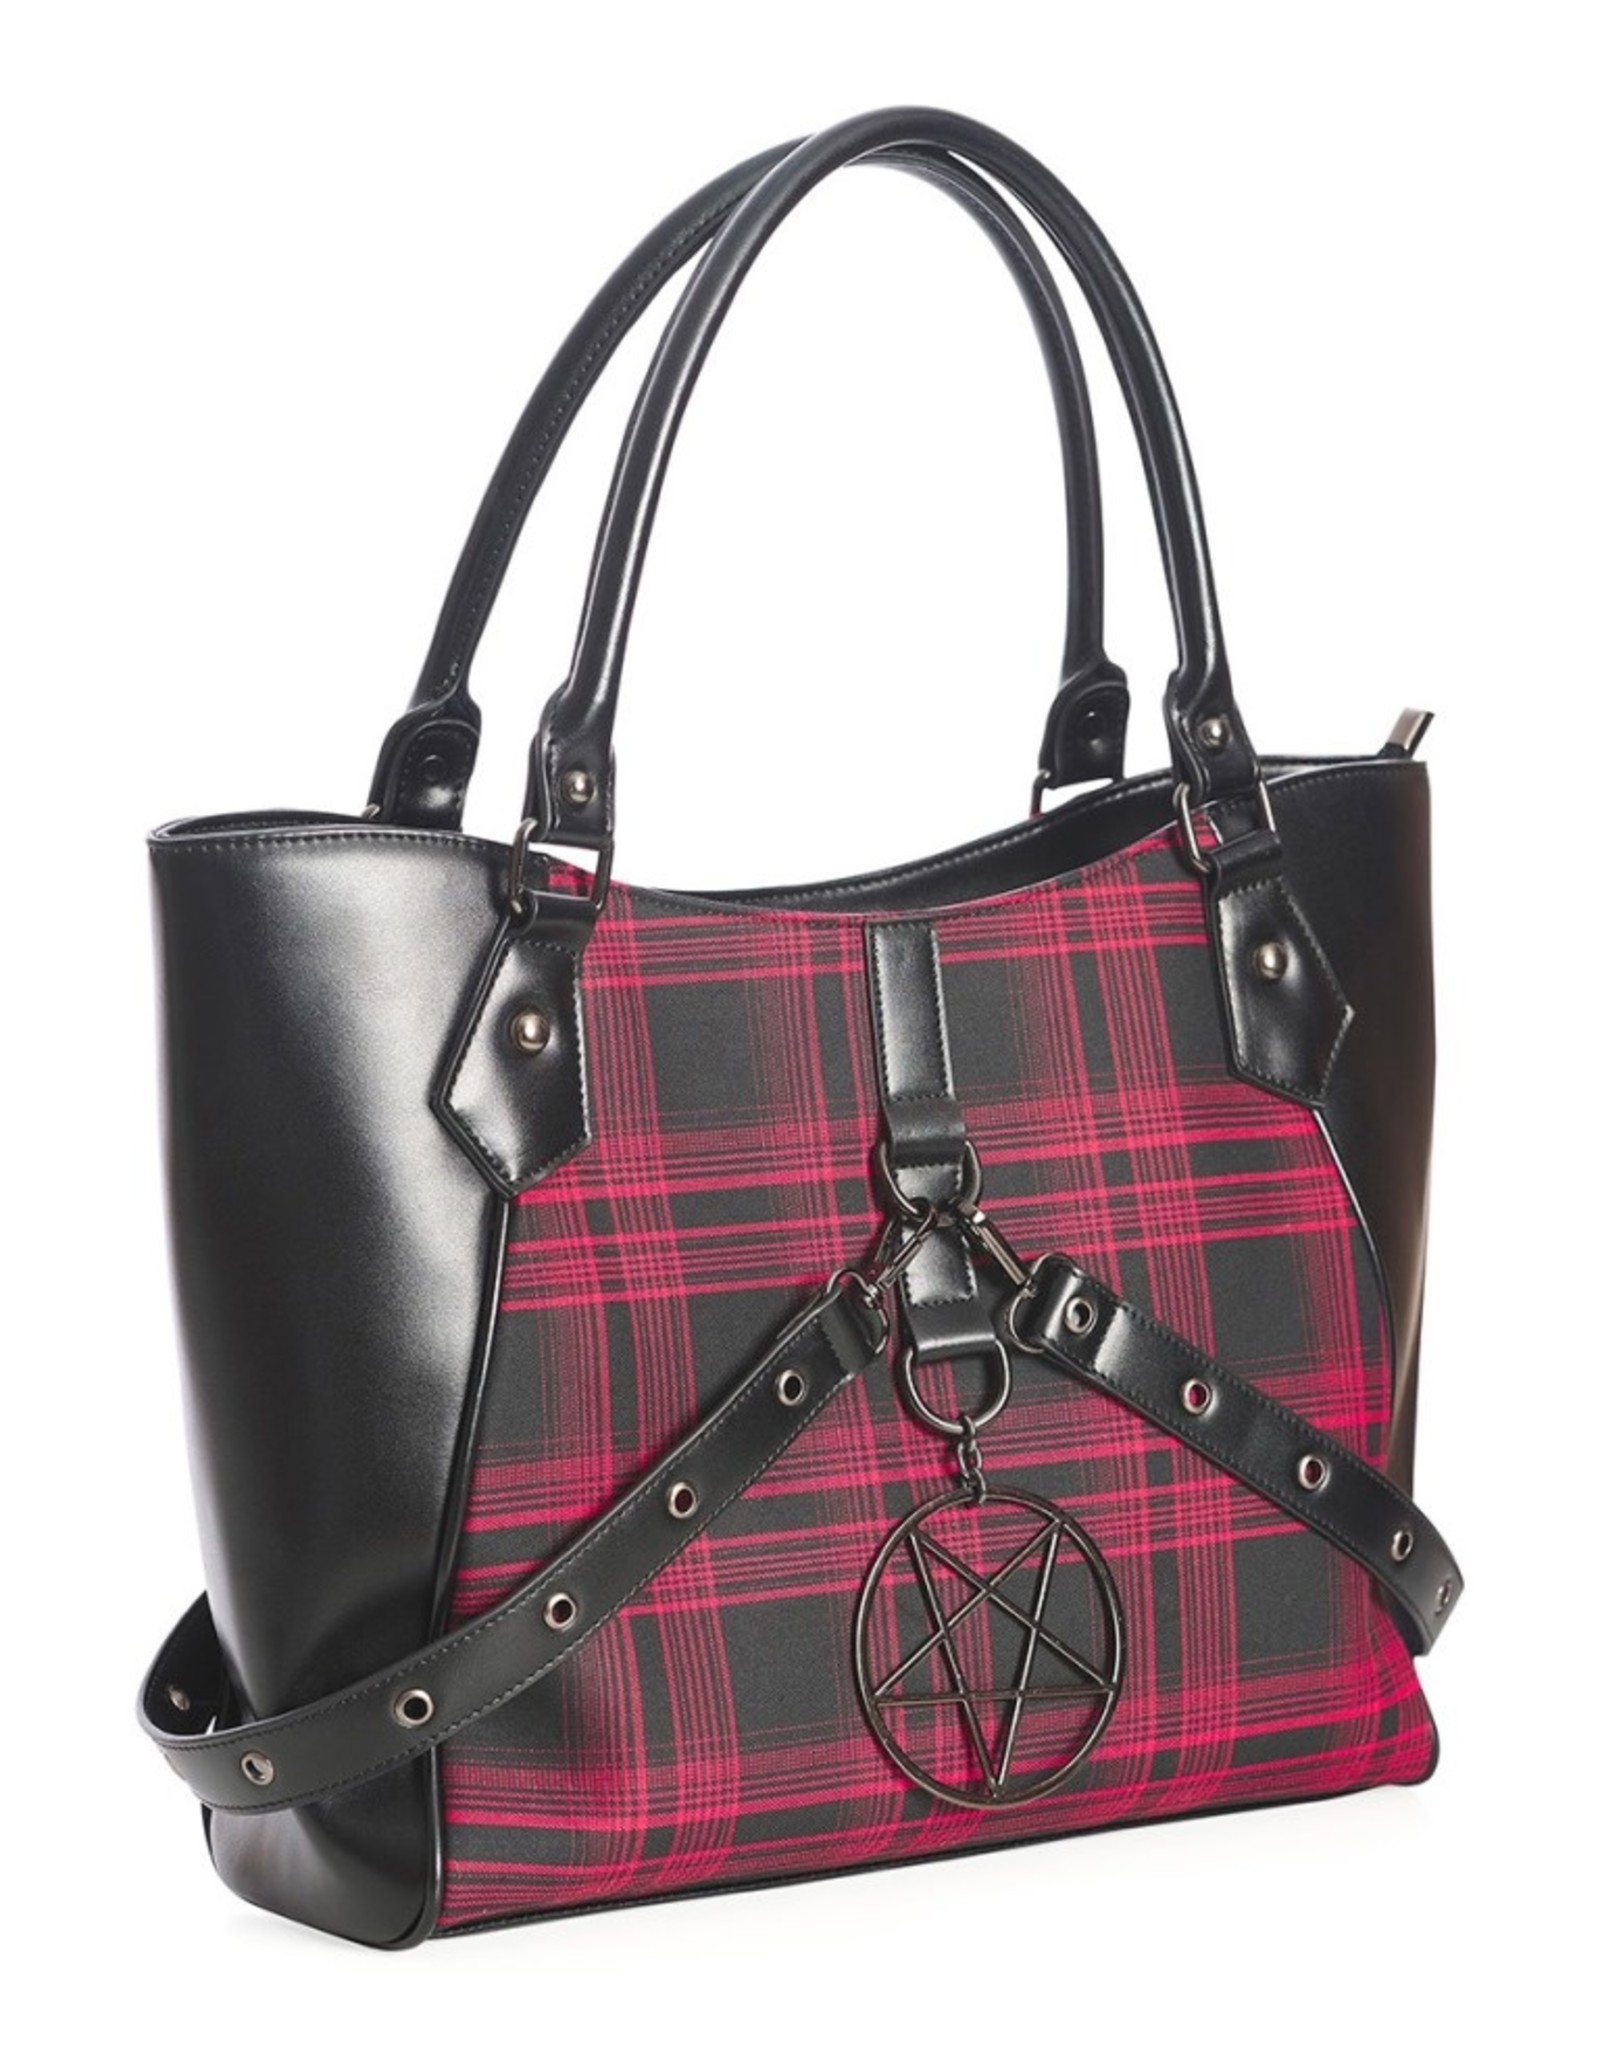 Banned Gothic bags Steampunk bags - Banned In Oblivion We Trust Tote Bag with Pentagram charm